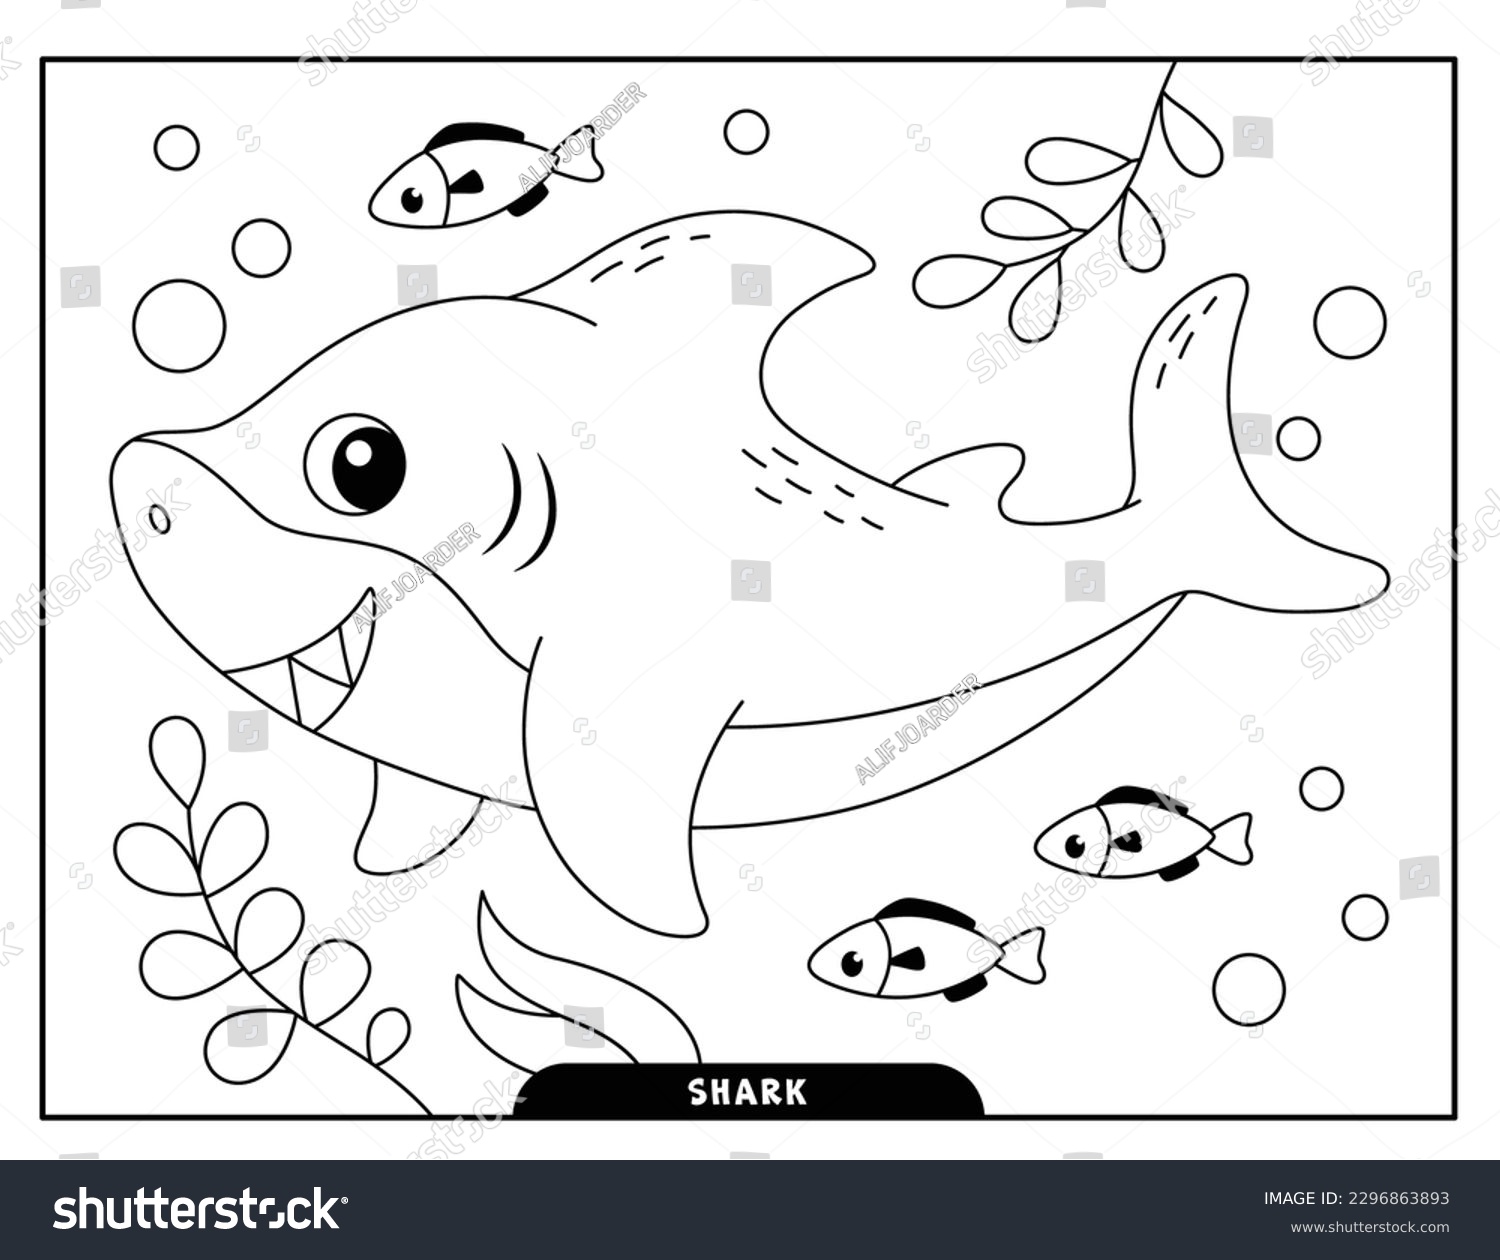 Shark coloring page images stock photos d objects vectors